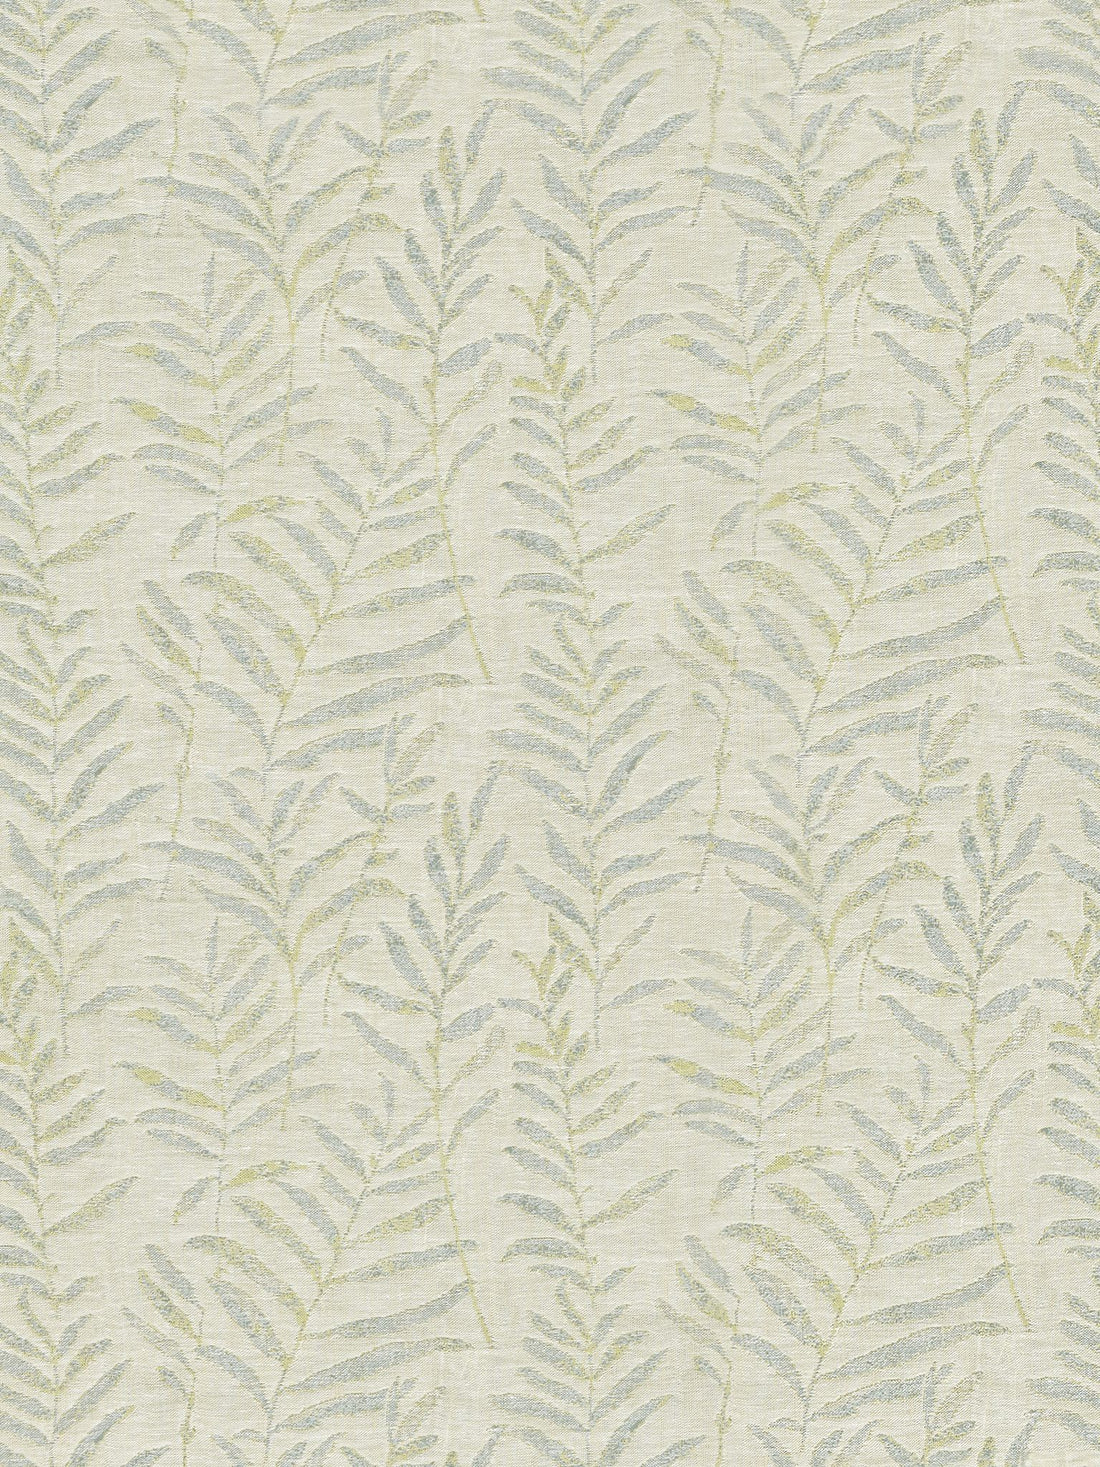 Willow Weave fabric in mist color - pattern number GW 000127211 - by Scalamandre in the Grey Watkins collection